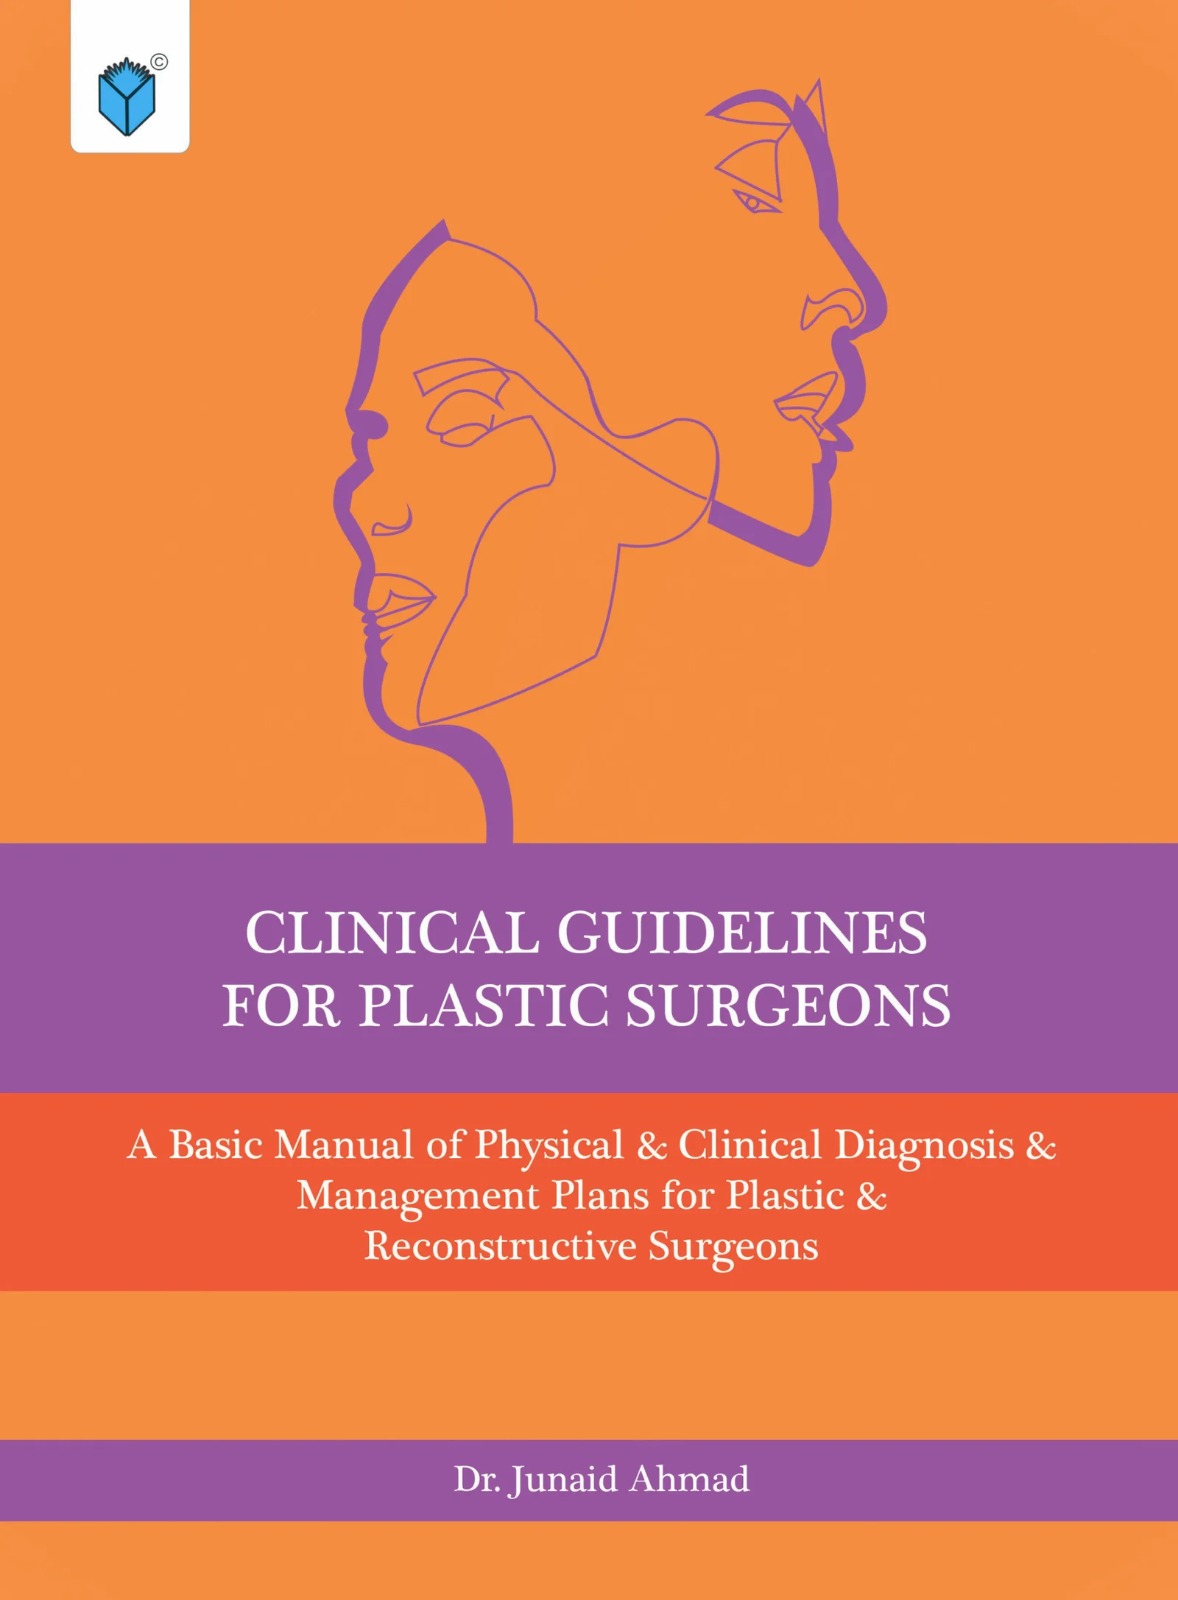 CLINICAL GUIDELINES FOR PLASTIC SURGEONS